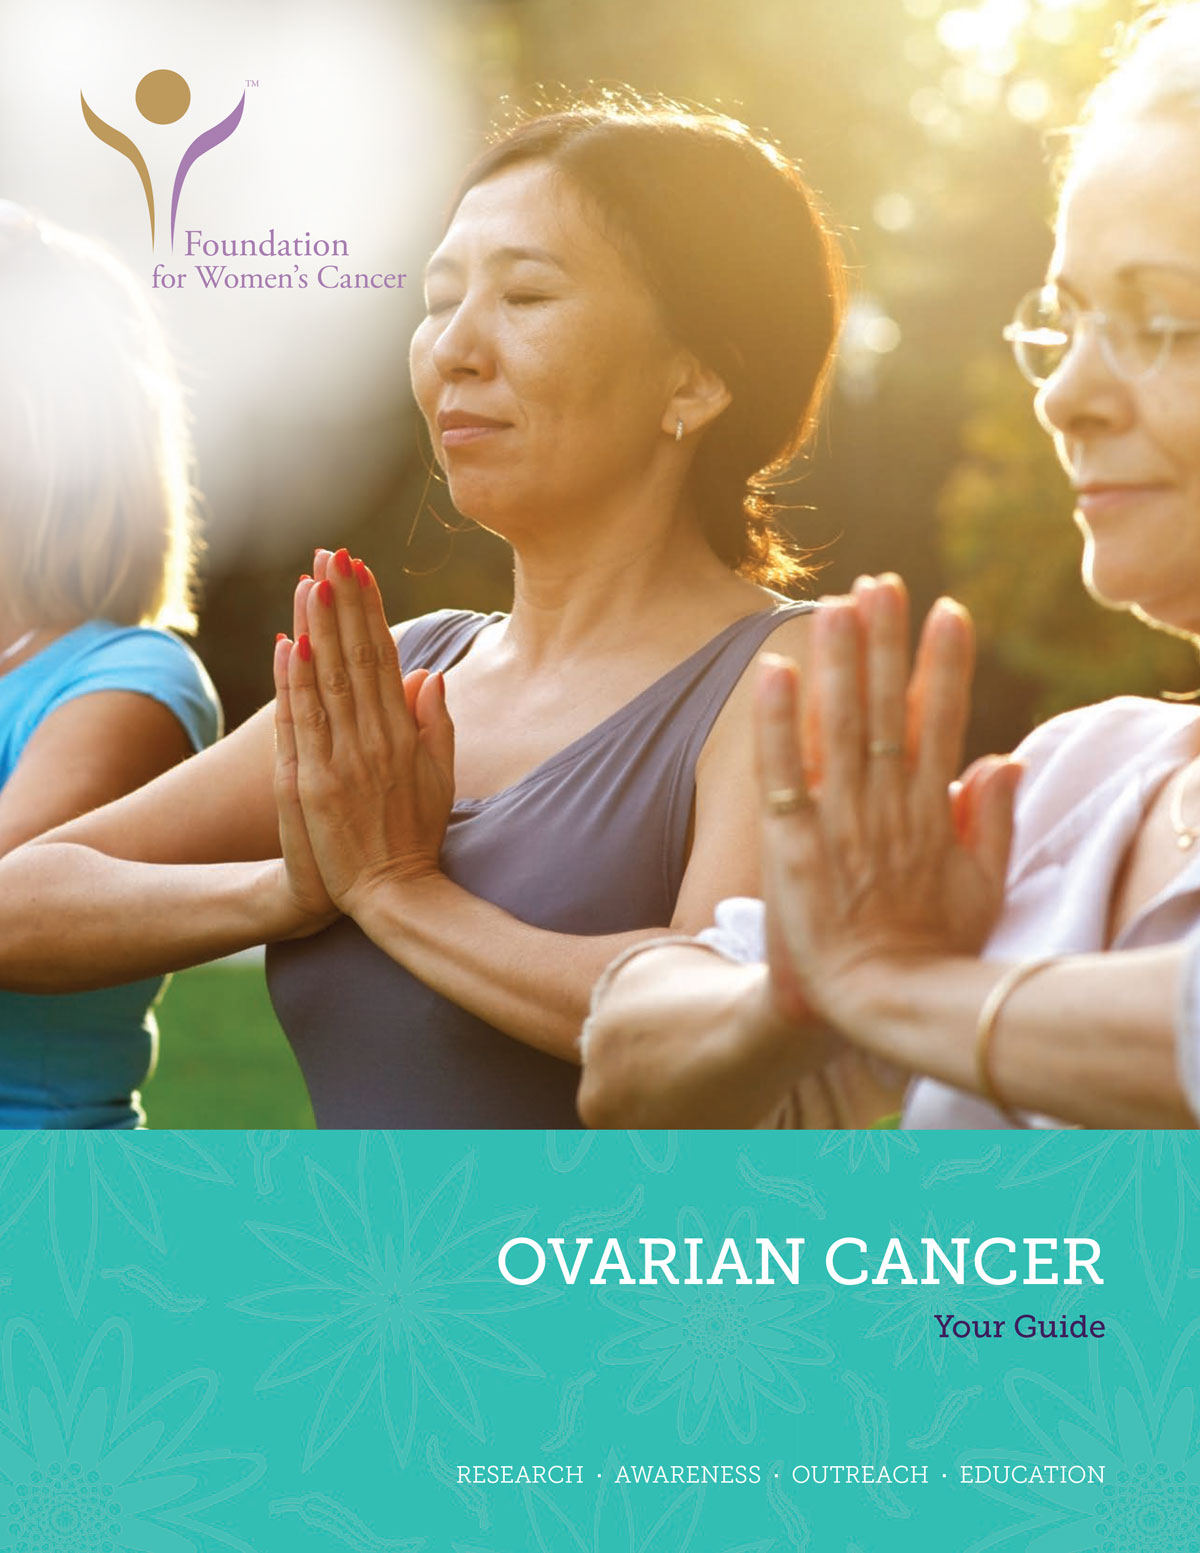 Ovarian Cancer: Your Guide